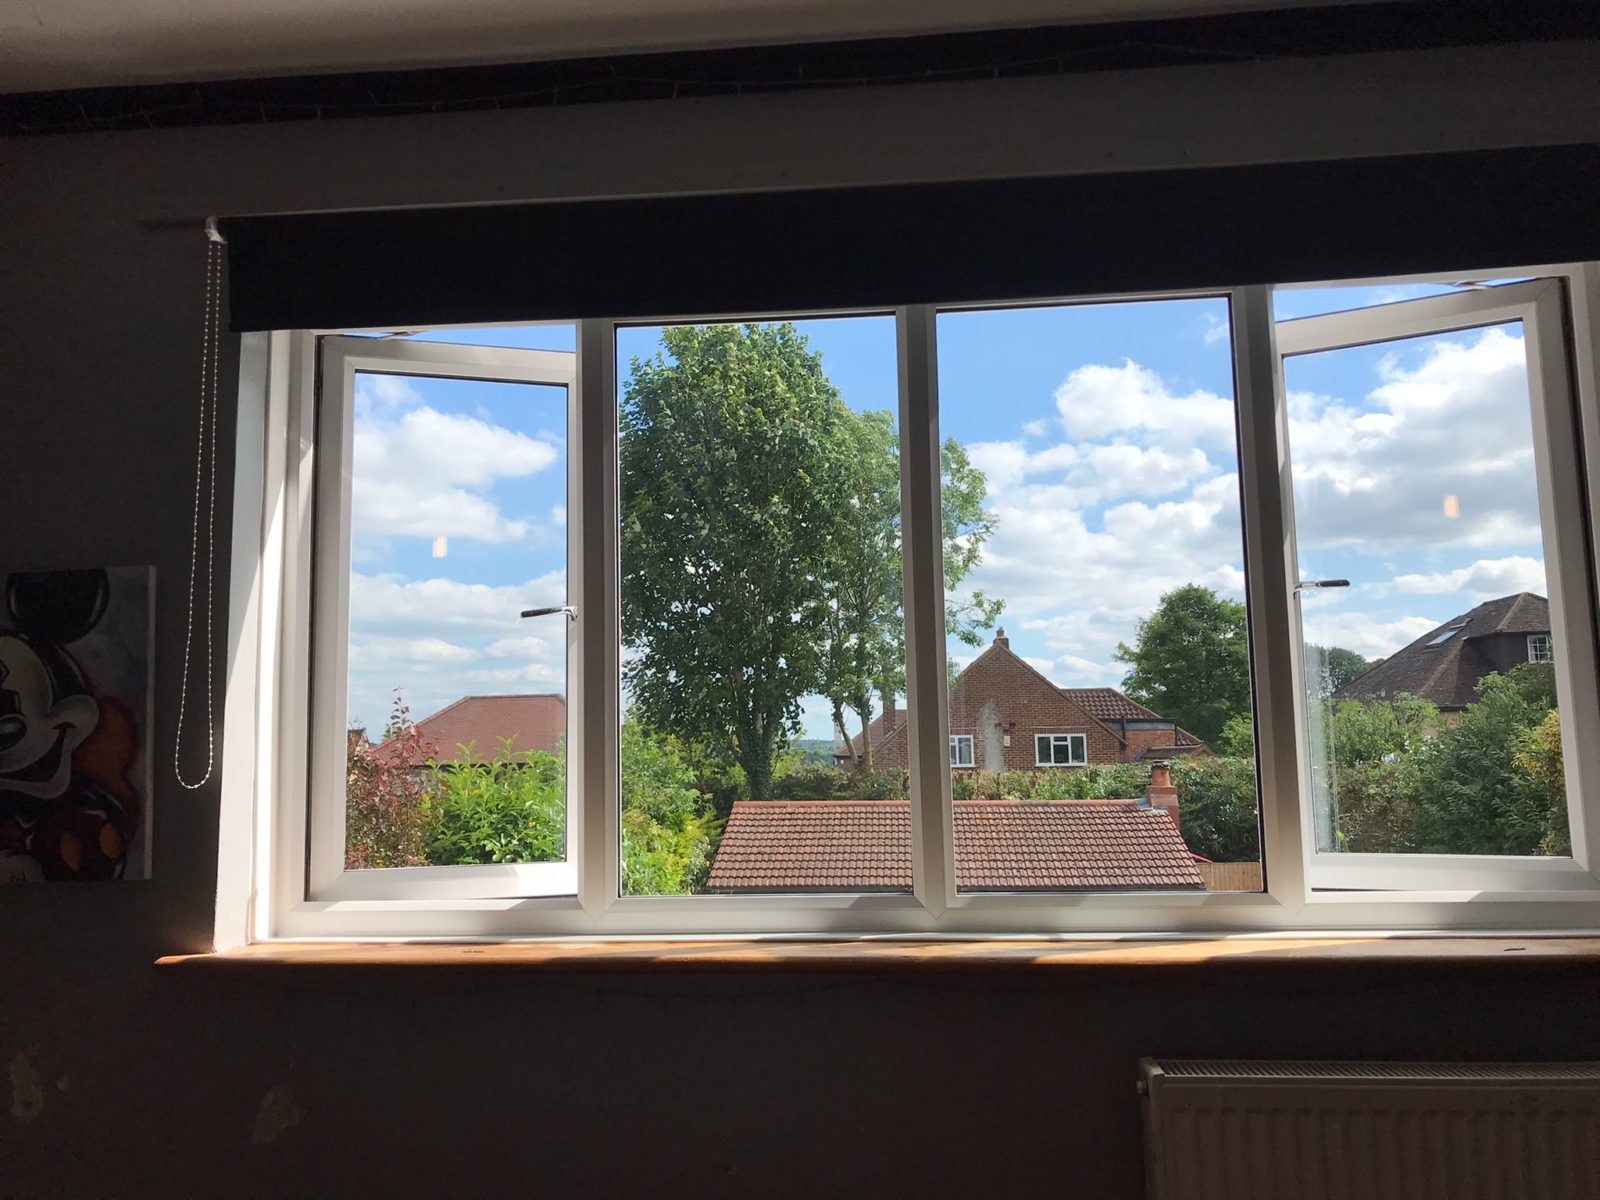 System 10 Chamfered Bevelled UPVC Windows With Openers